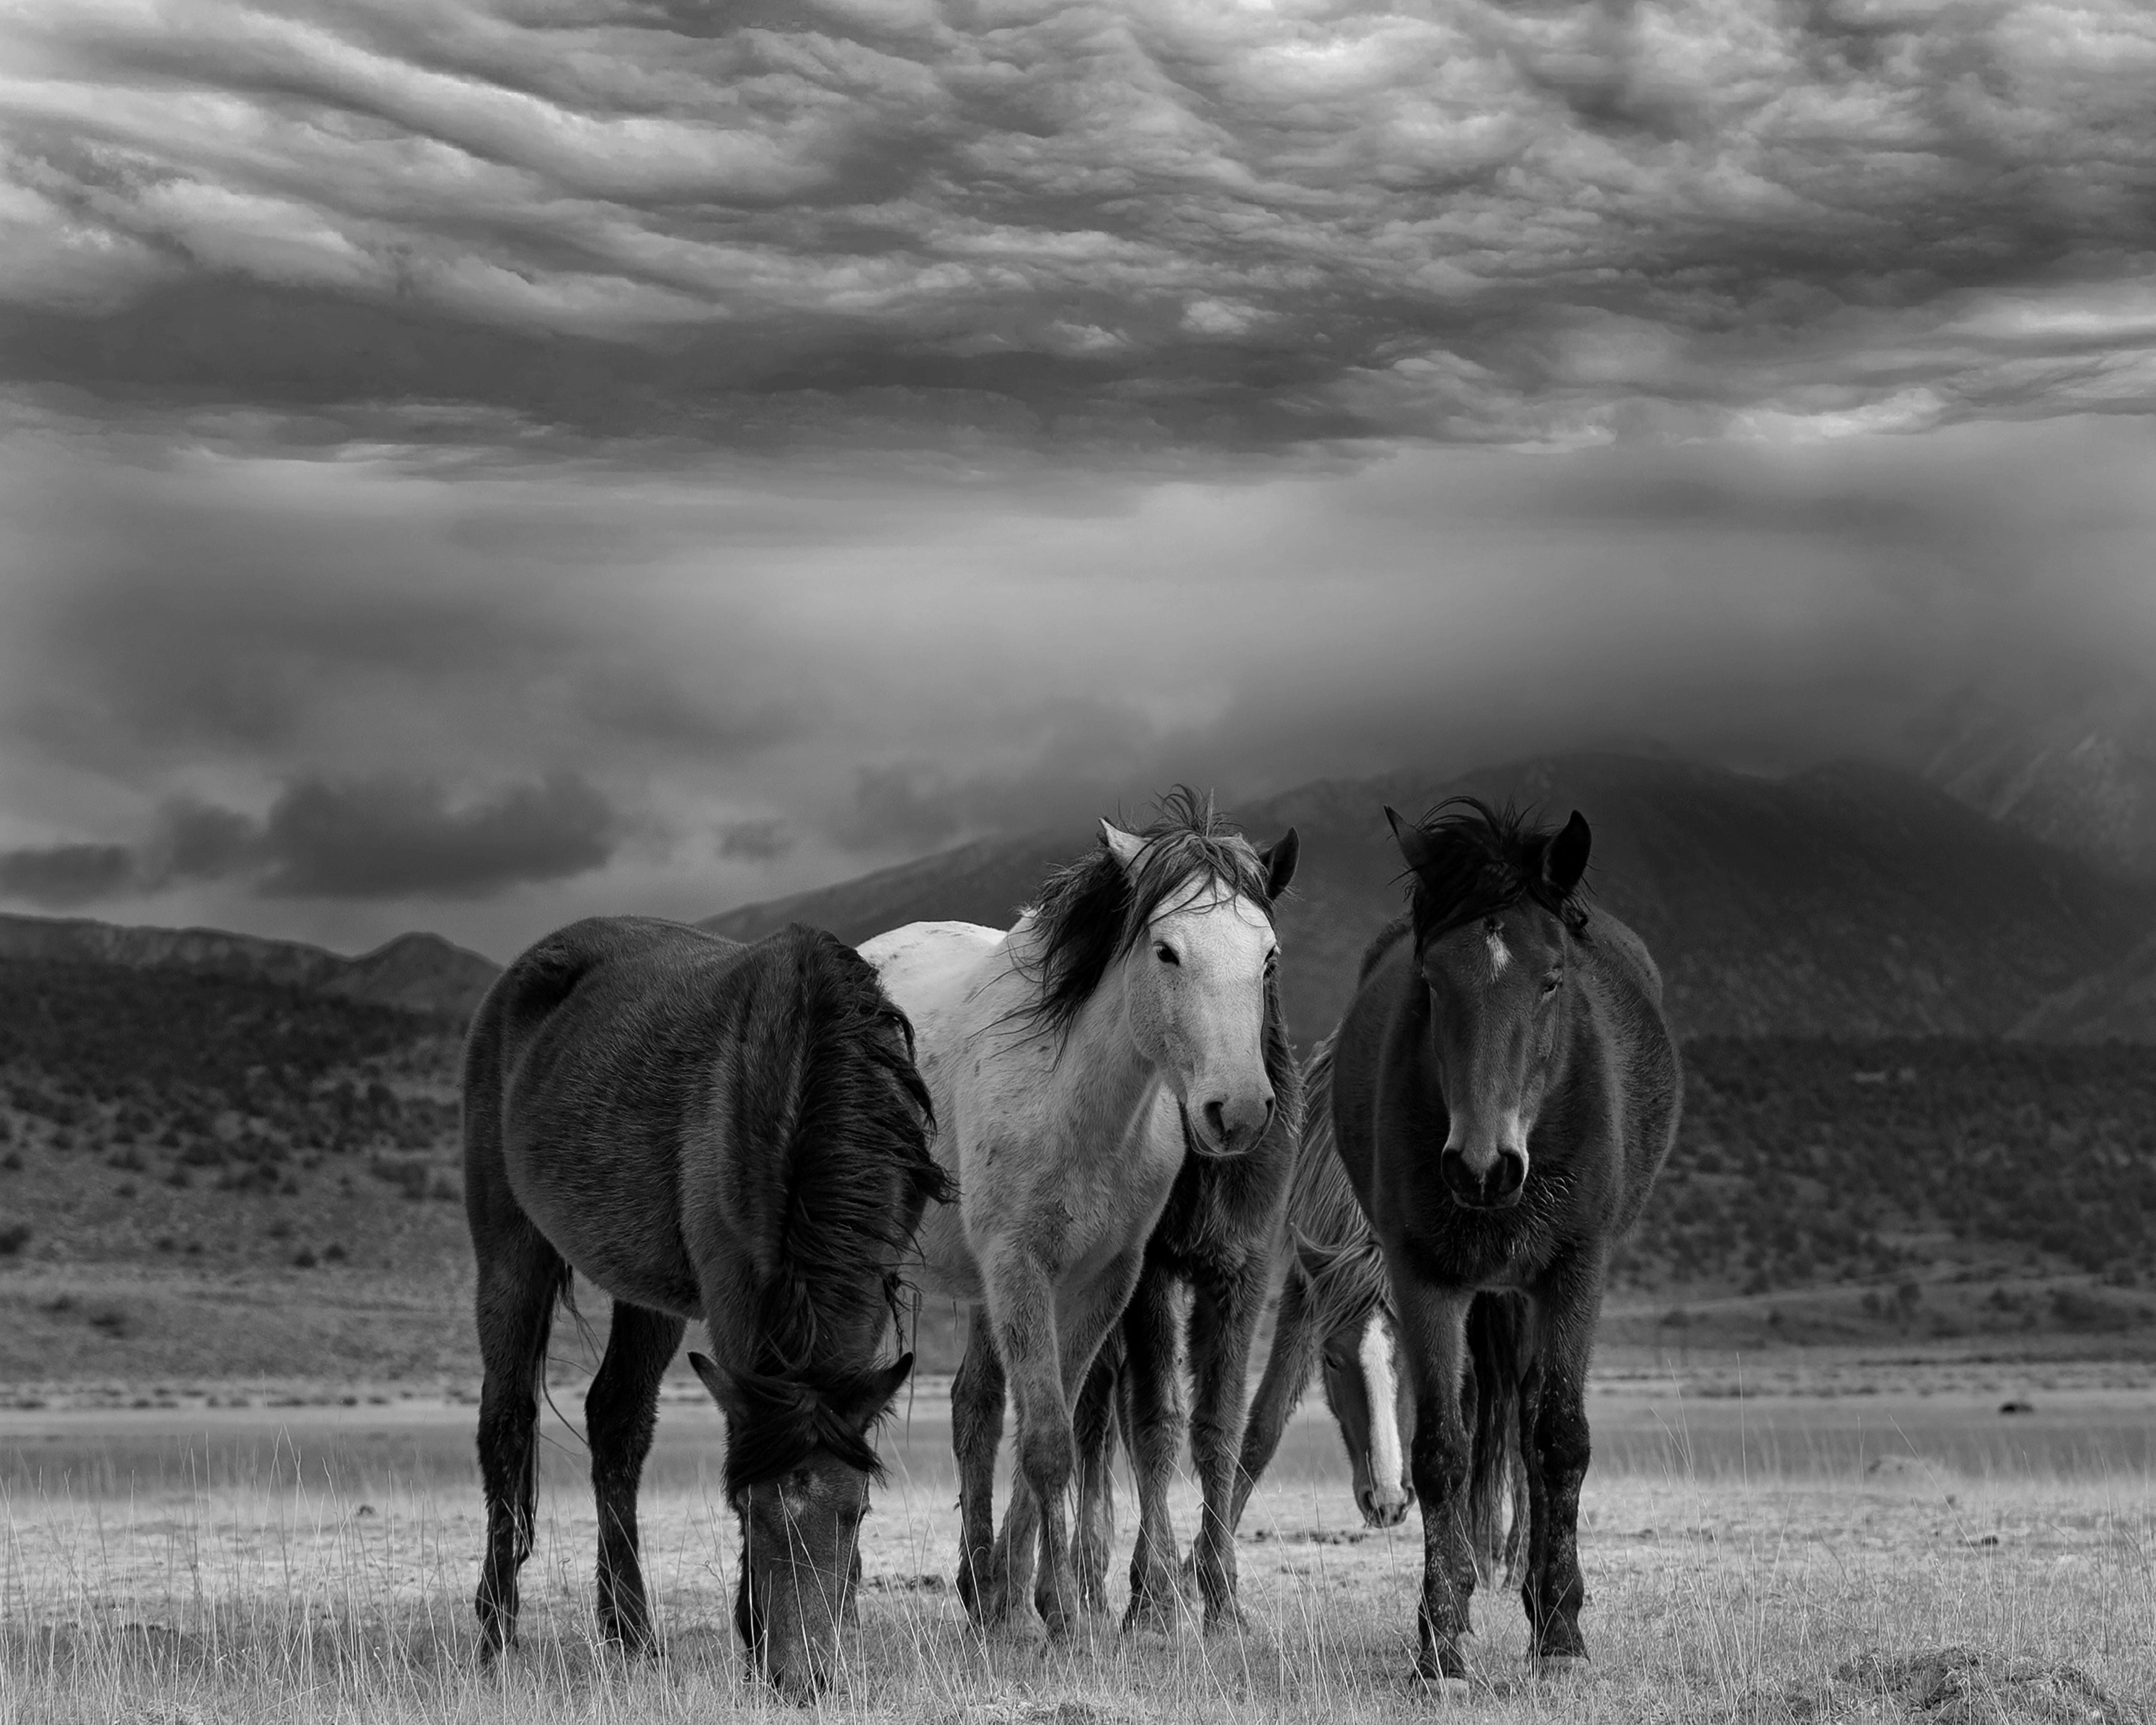 Shane Russeck Animal Print - Black and White Photography Wild Horses, Mustangs, Dust & Horses 40x50 Unsigned